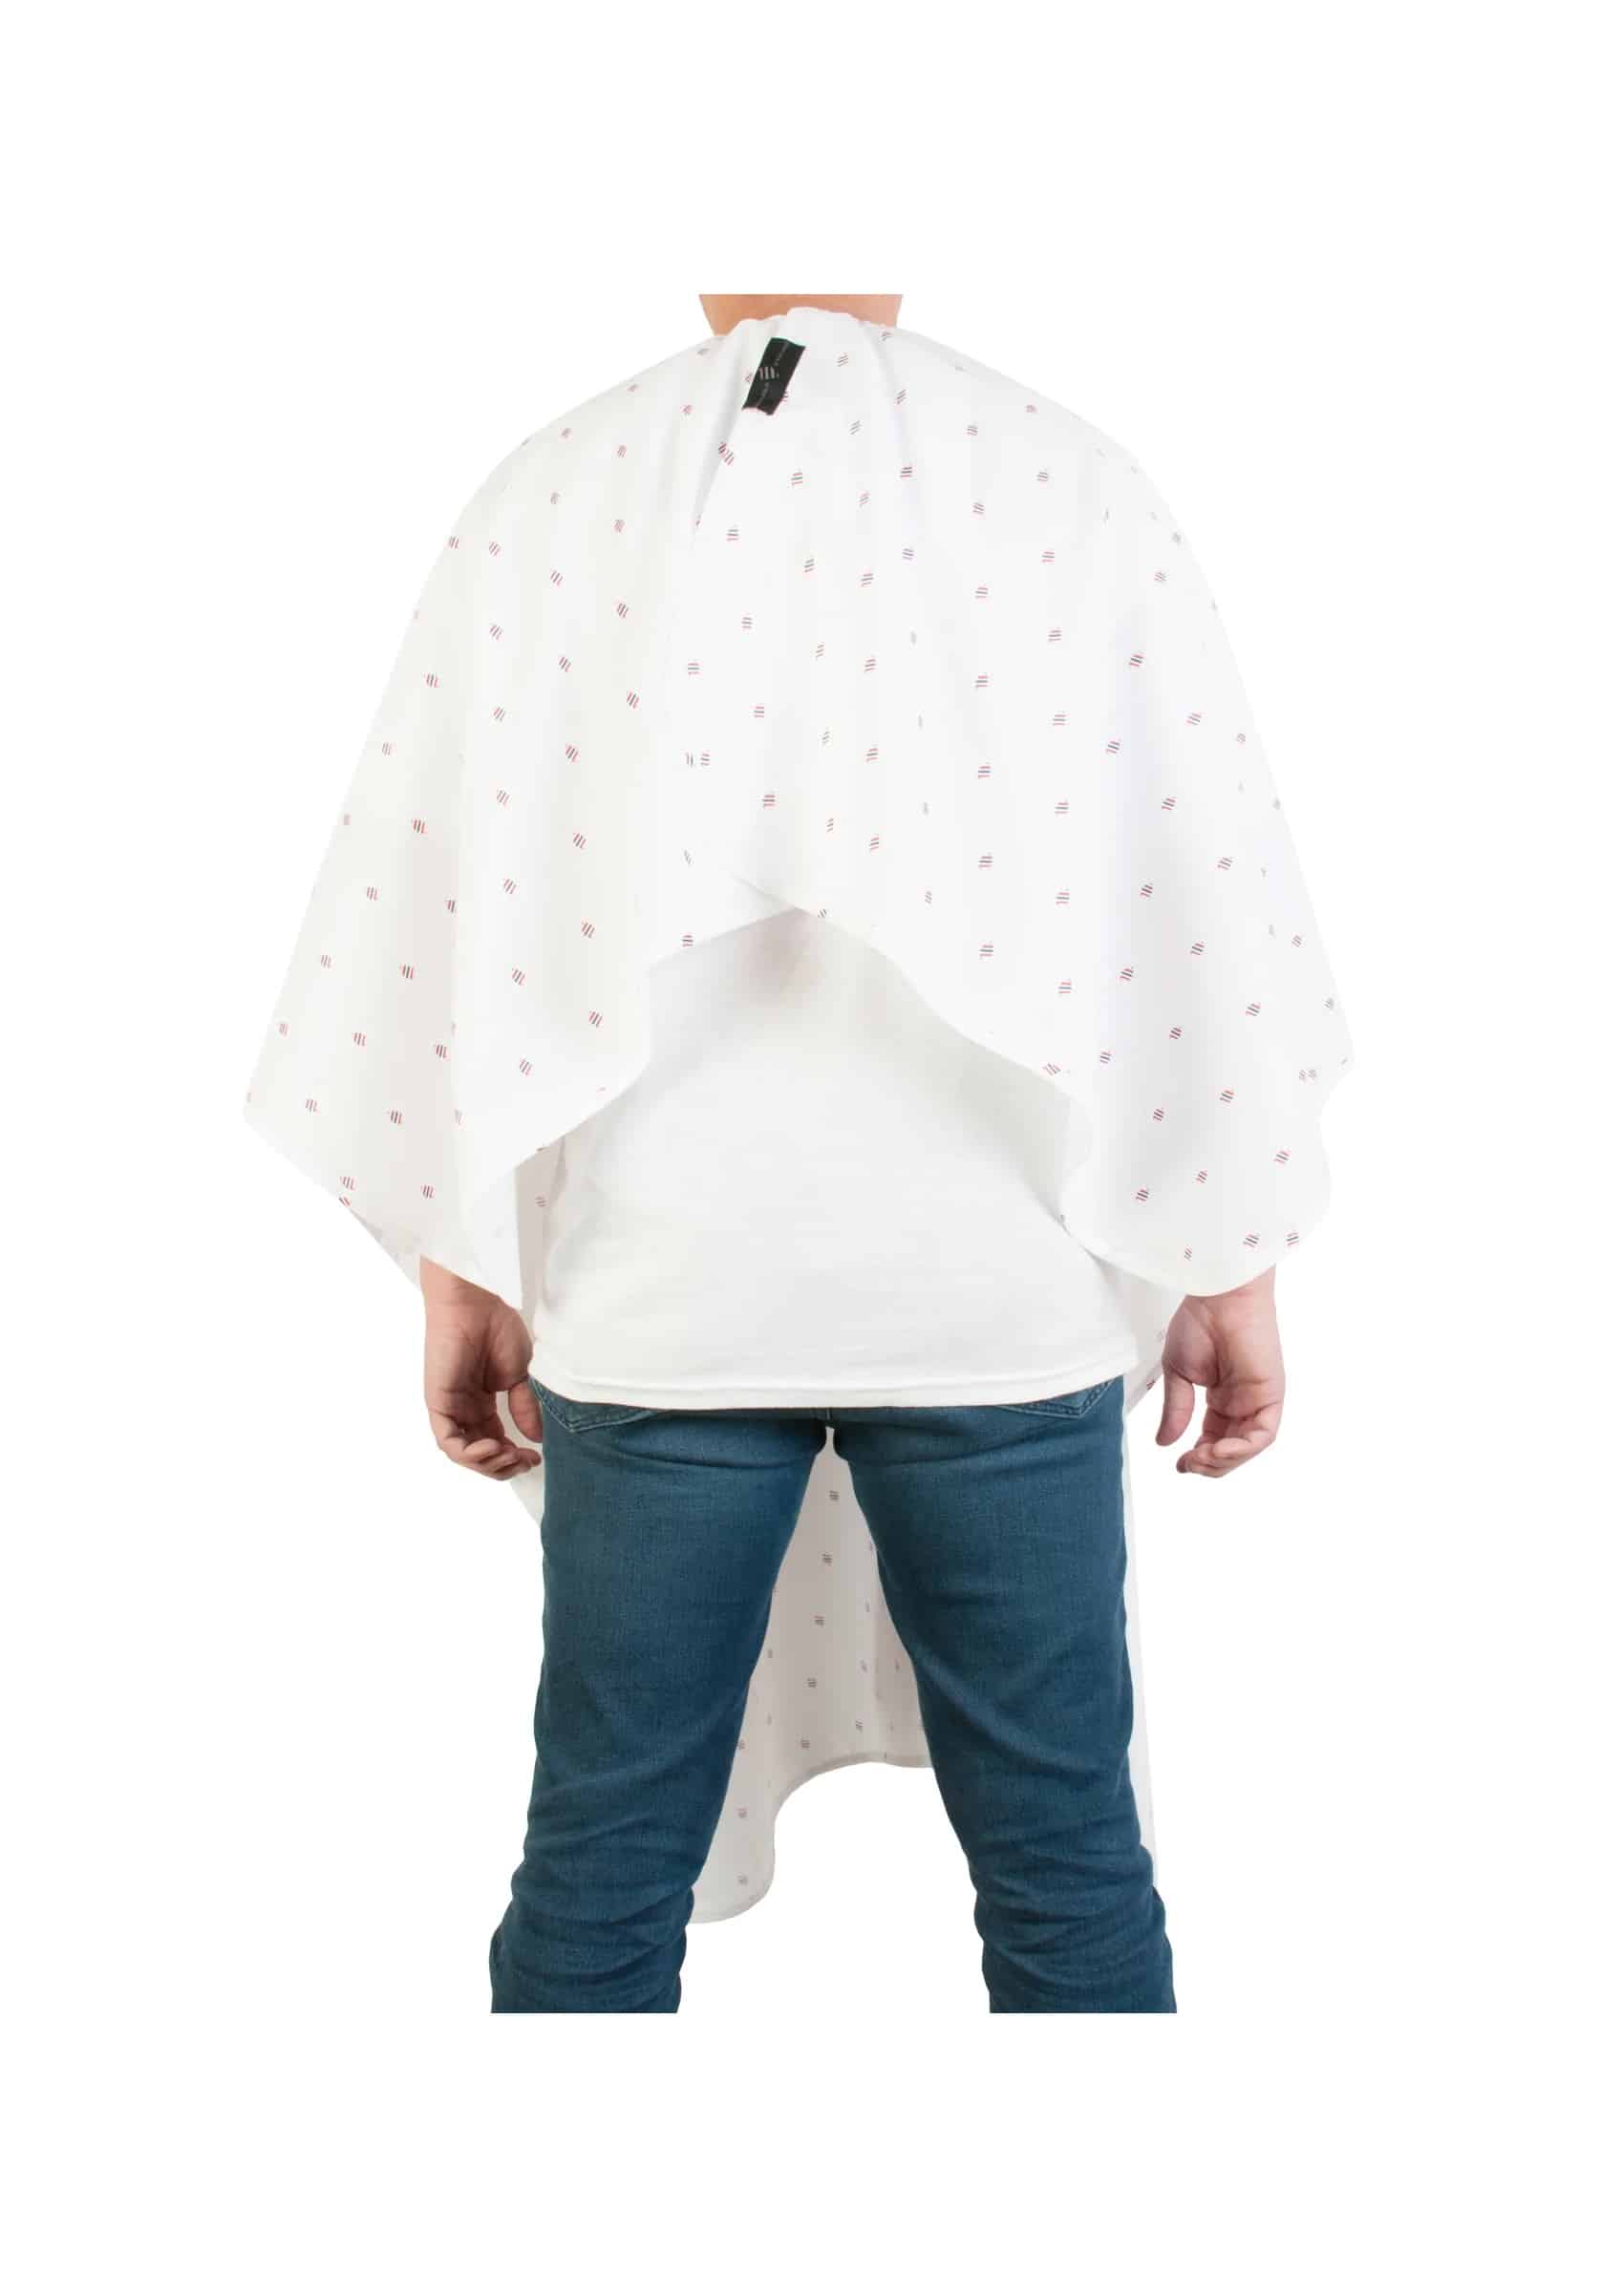 Barber Strong Barber Cape Shield Collection - White Standing Back